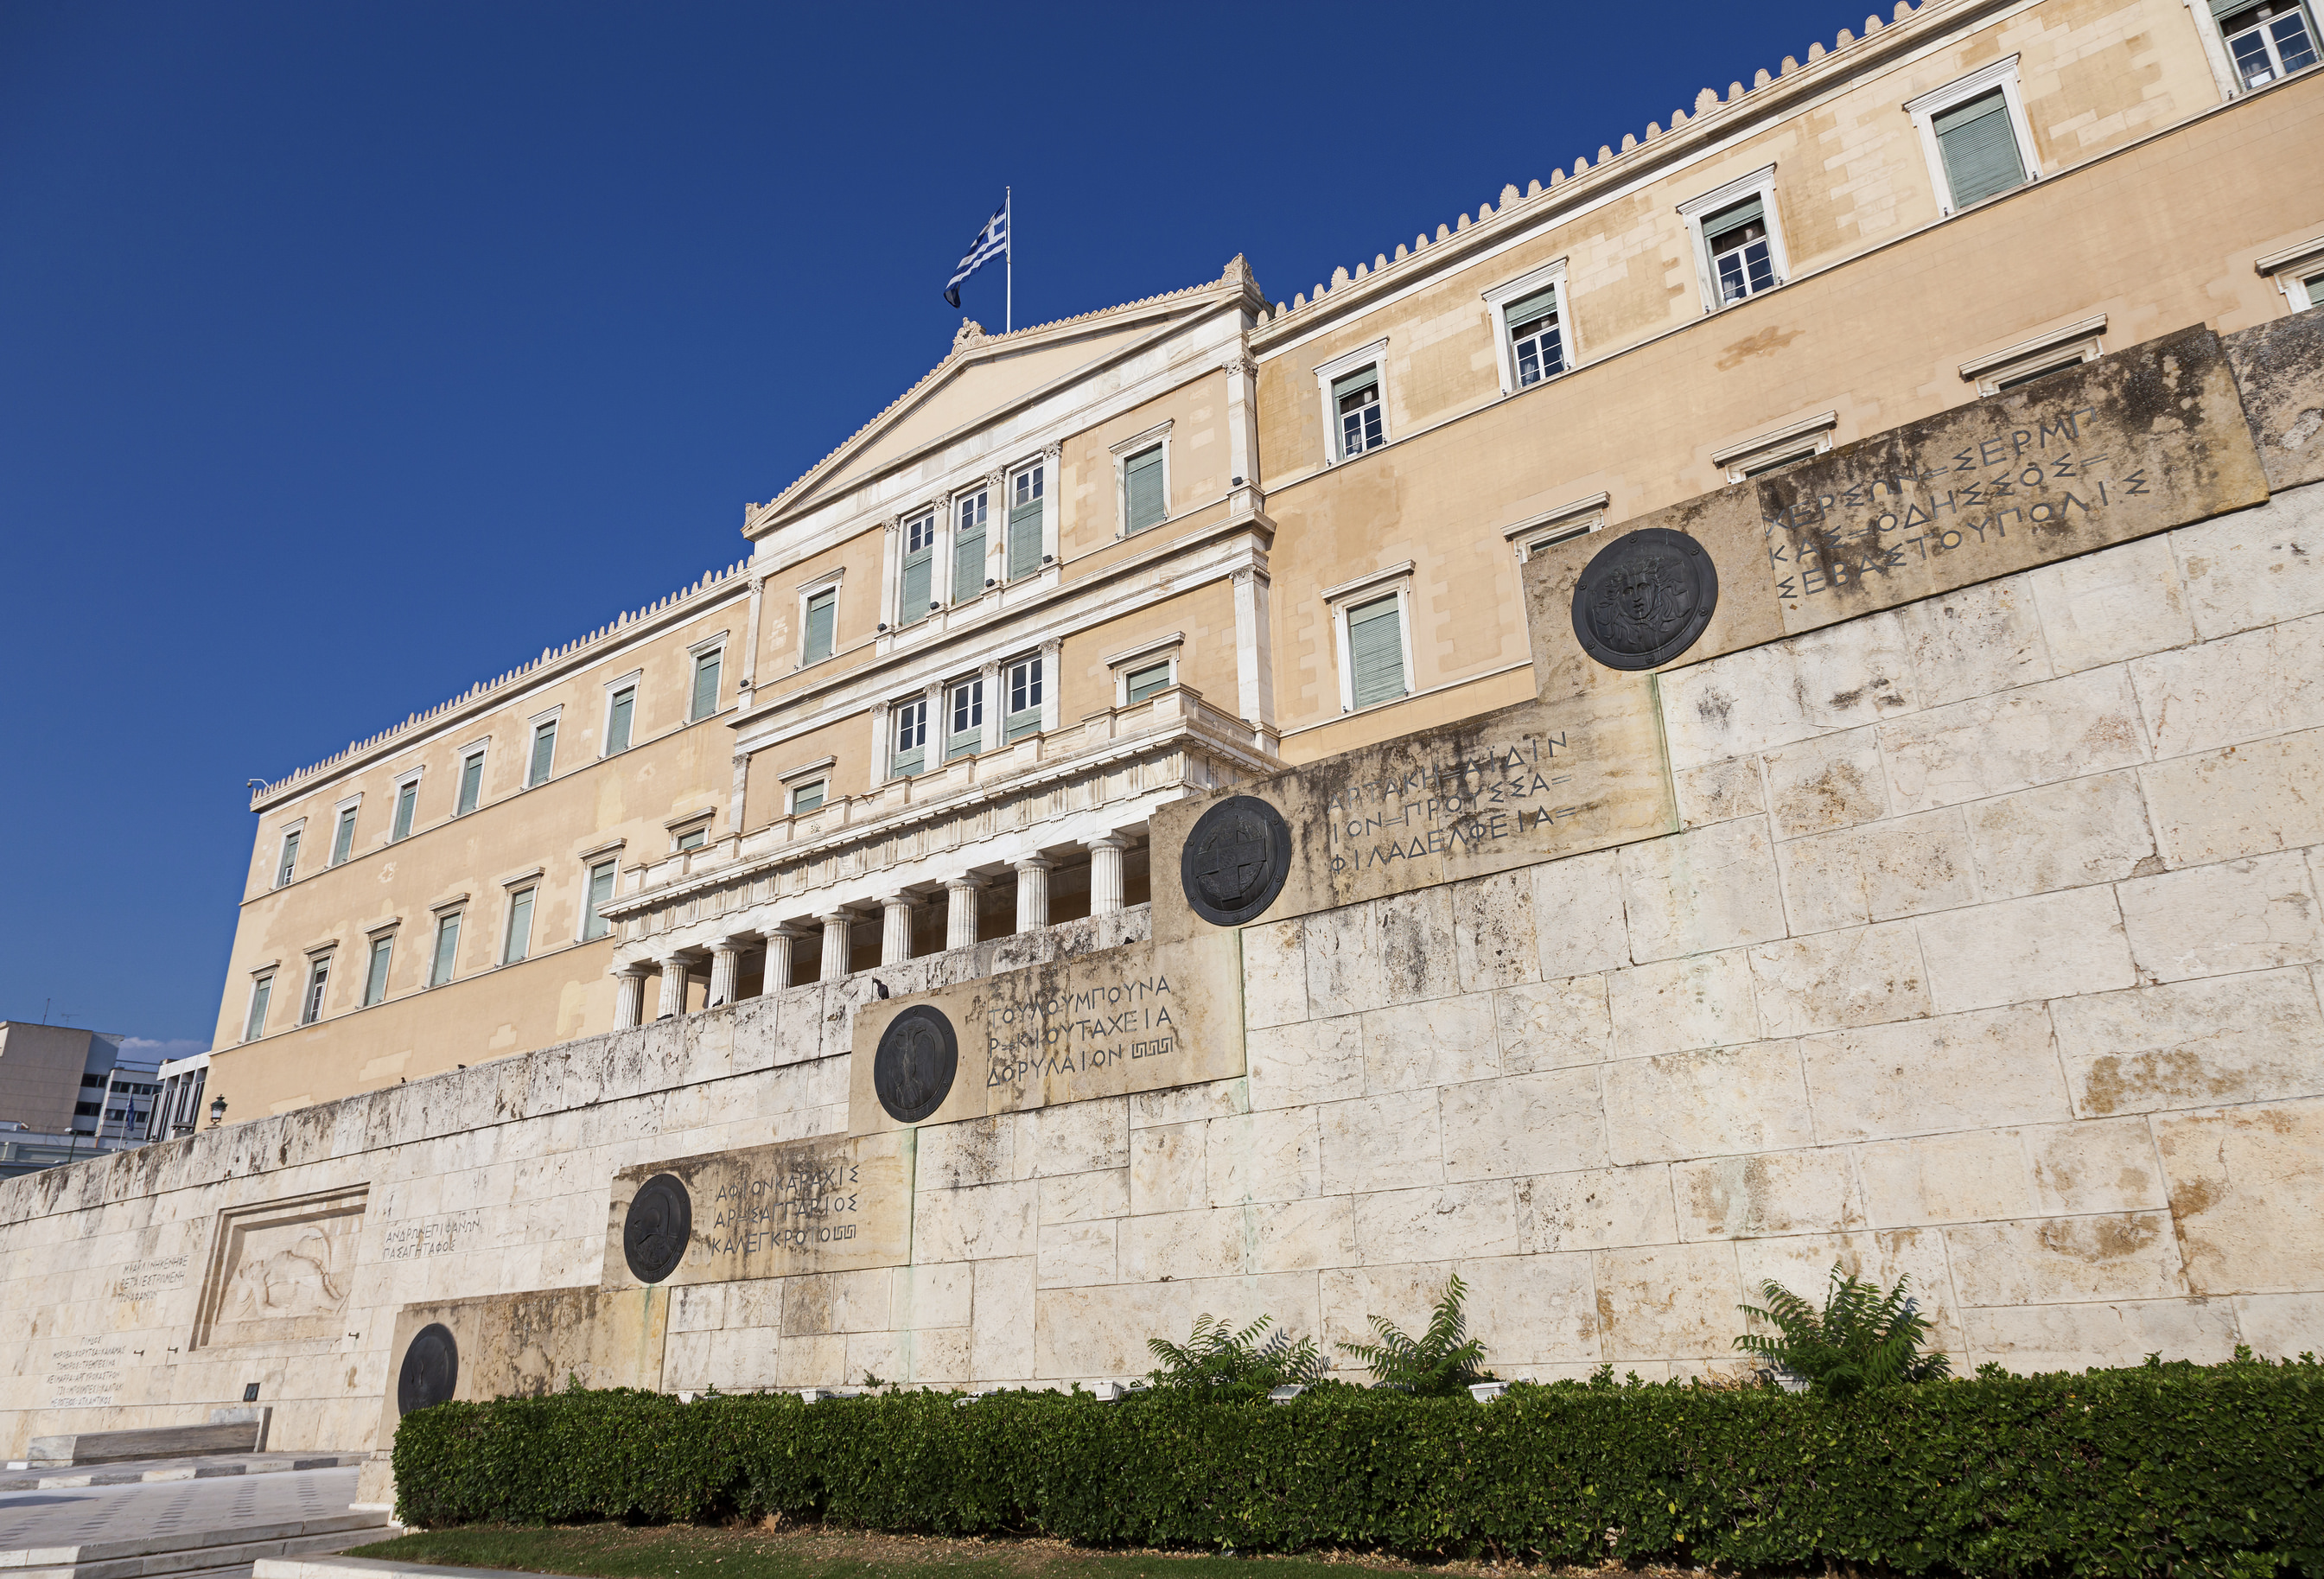 The front facade of the current Hellenic Parliament building, Old Royal Palace